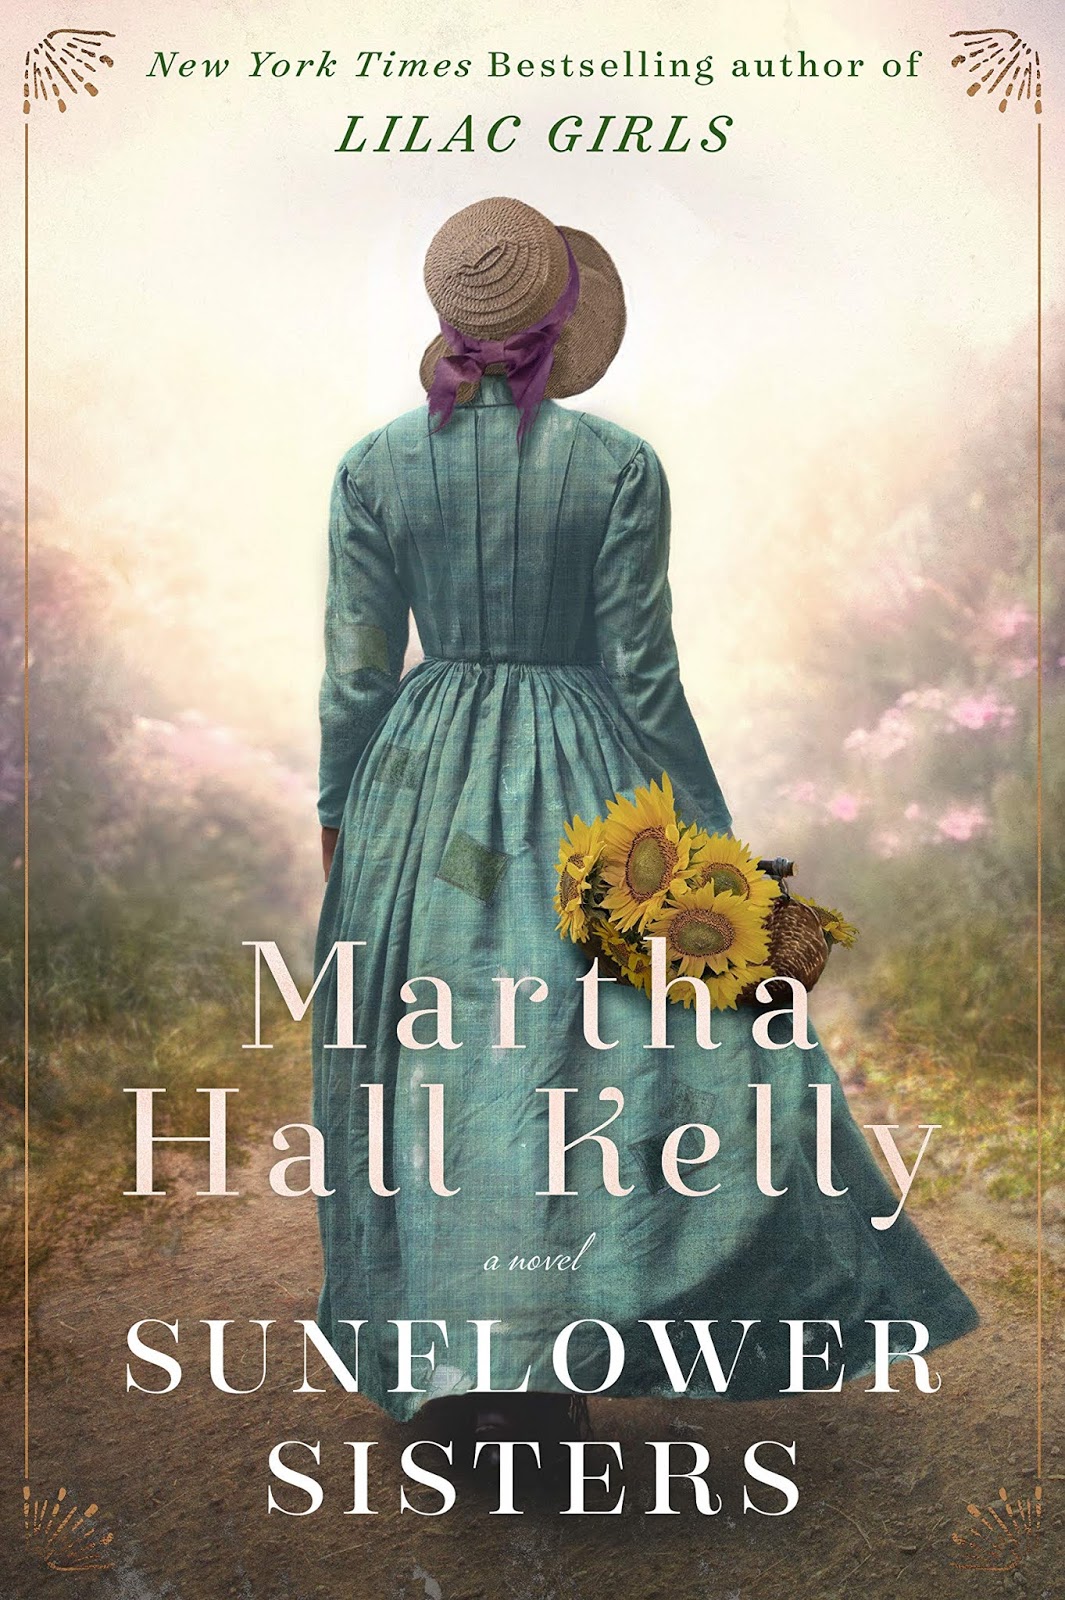 Review: Sunflower Sisters by Martha Hall Kelly (audio)